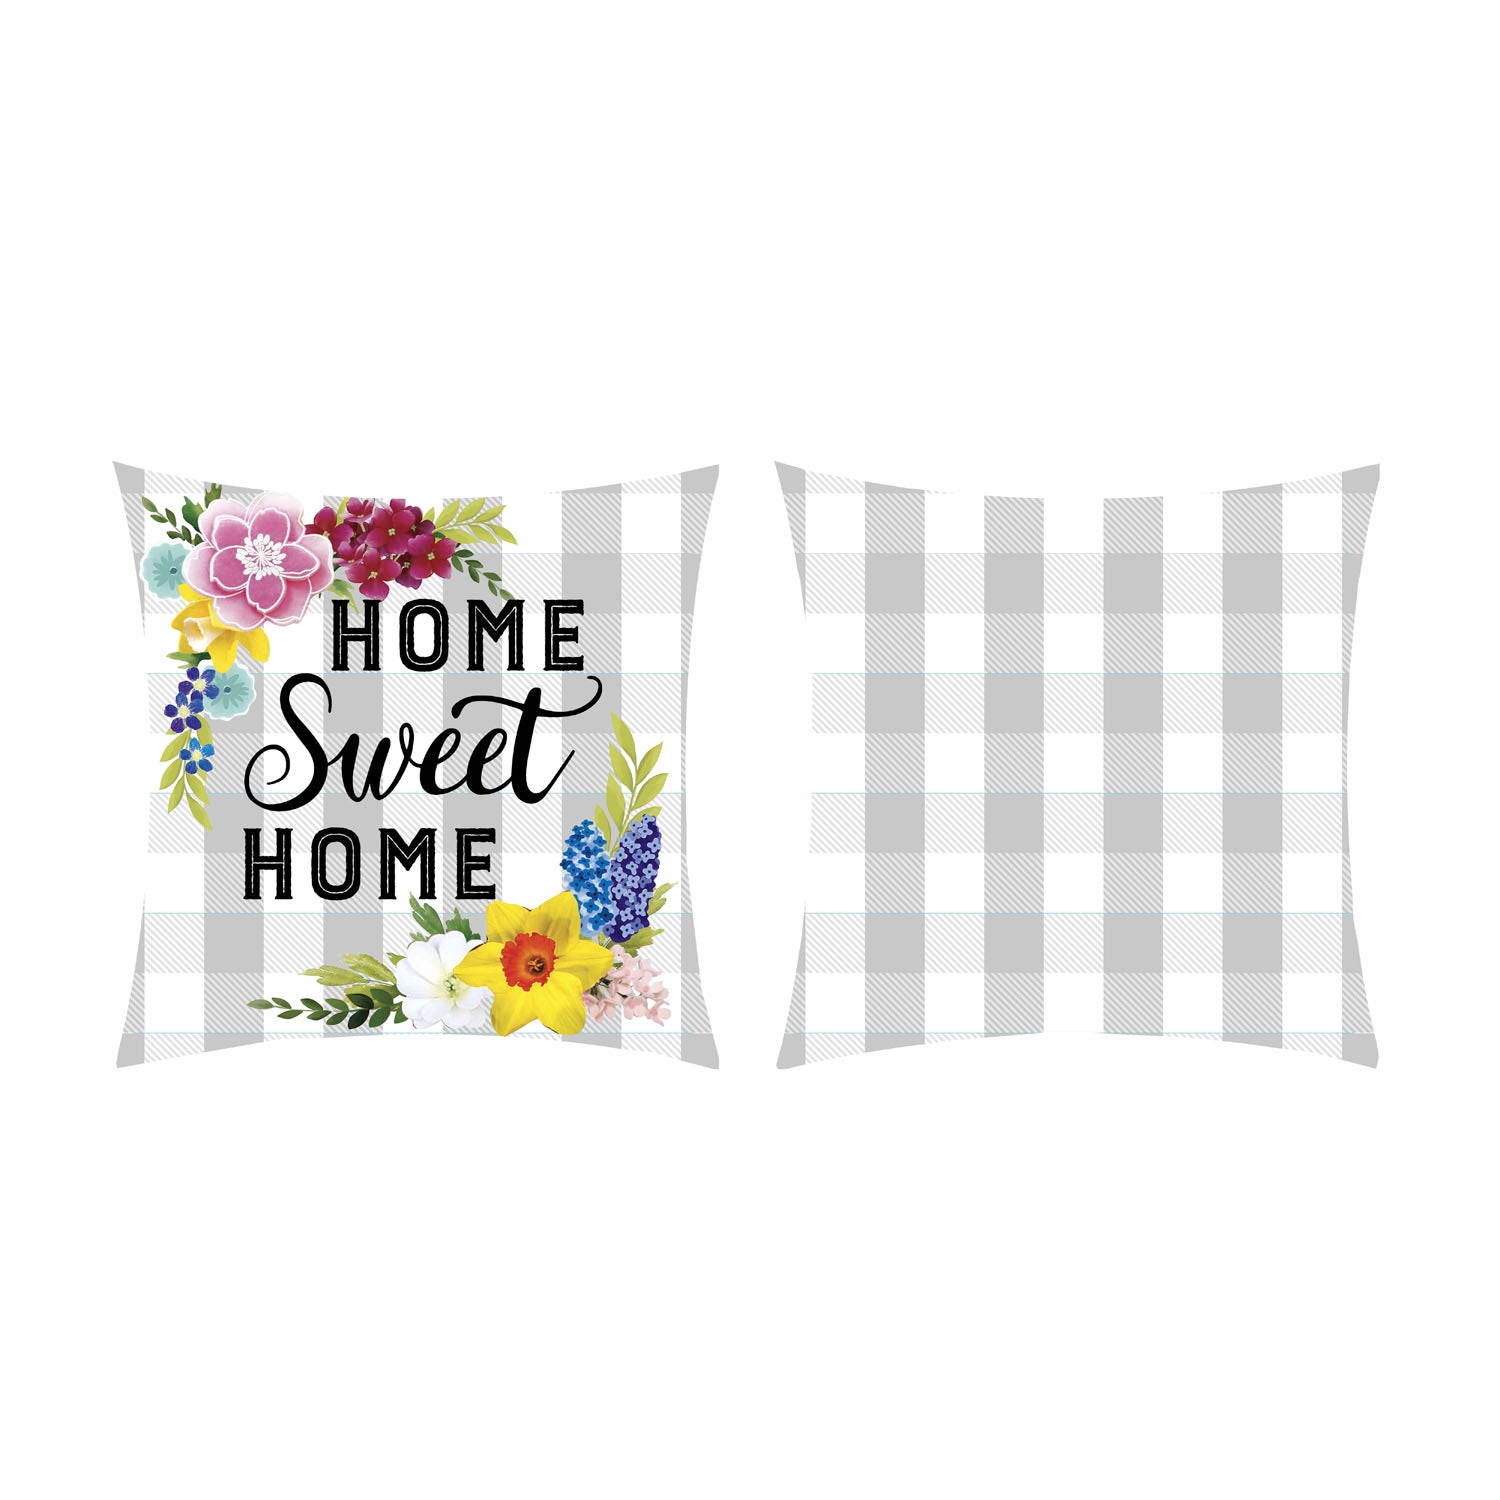 Home Sweet Home Plaid Interchangeable Pillow Cover